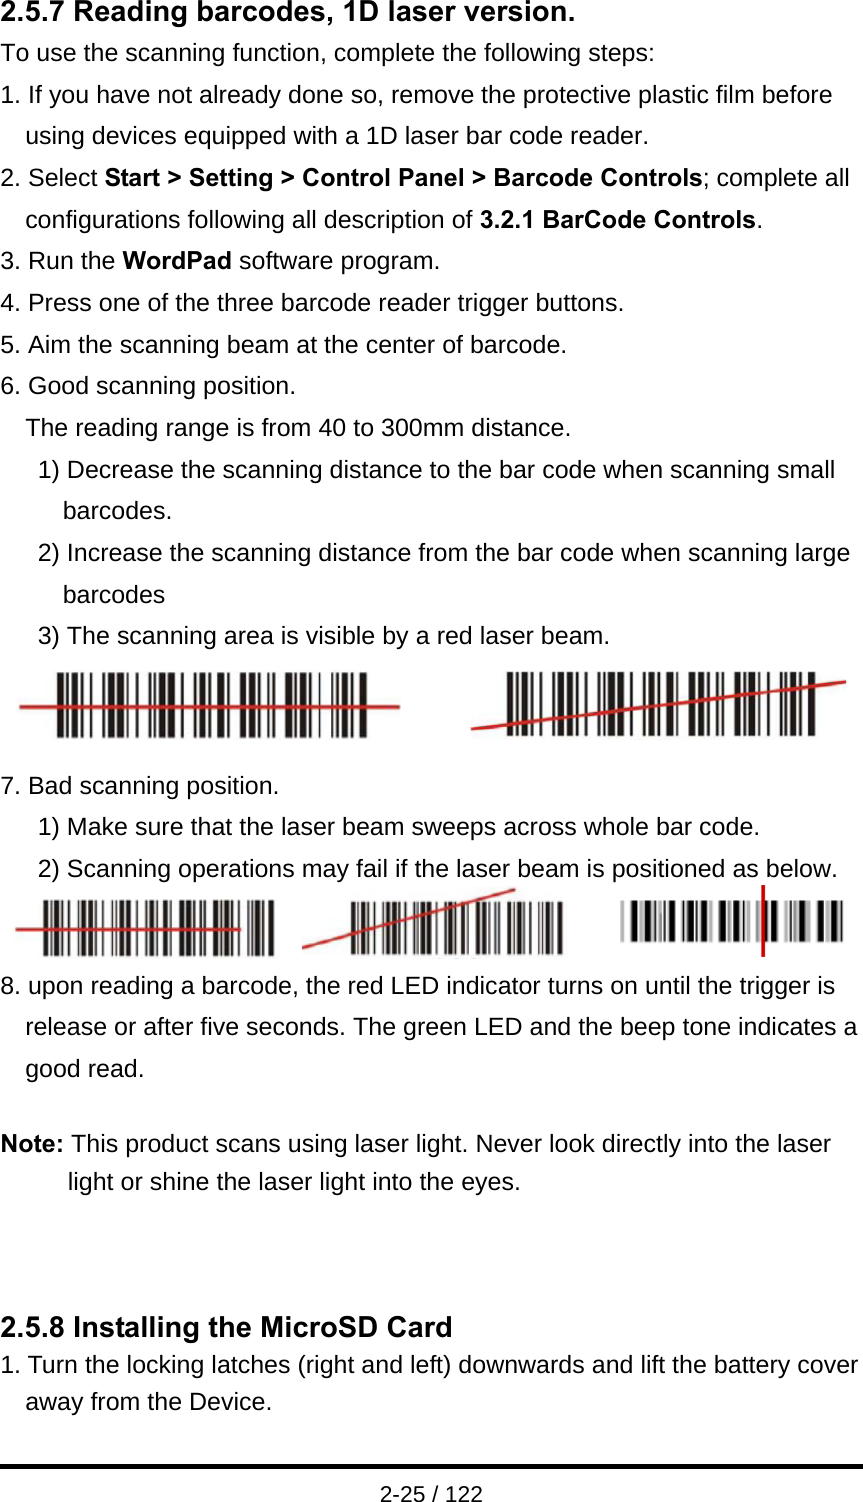  2-25 / 122 2.5.7 Reading barcodes, 1D laser version. To use the scanning function, complete the following steps: 1. If you have not already done so, remove the protective plastic film before using devices equipped with a 1D laser bar code reader. 2. Select Start &gt; Setting &gt; Control Panel &gt; Barcode Controls; complete all configurations following all description of 3.2.1 BarCode Controls. 3. Run the WordPad software program. 4. Press one of the three barcode reader trigger buttons. 5. Aim the scanning beam at the center of barcode. 6. Good scanning position. The reading range is from 40 to 300mm distance. 1) Decrease the scanning distance to the bar code when scanning small barcodes. 2) Increase the scanning distance from the bar code when scanning large barcodes 3) The scanning area is visible by a red laser beam.         7. Bad scanning position. 1) Make sure that the laser beam sweeps across whole bar code. 2) Scanning operations may fail if the laser beam is positioned as below.          8. upon reading a barcode, the red LED indicator turns on until the trigger is release or after five seconds. The green LED and the beep tone indicates a good read.  Note: This product scans using laser light. Never look directly into the laser light or shine the laser light into the eyes.    2.5.8 Installing the MicroSD Card 1. Turn the locking latches (right and left) downwards and lift the battery cover away from the Device. 